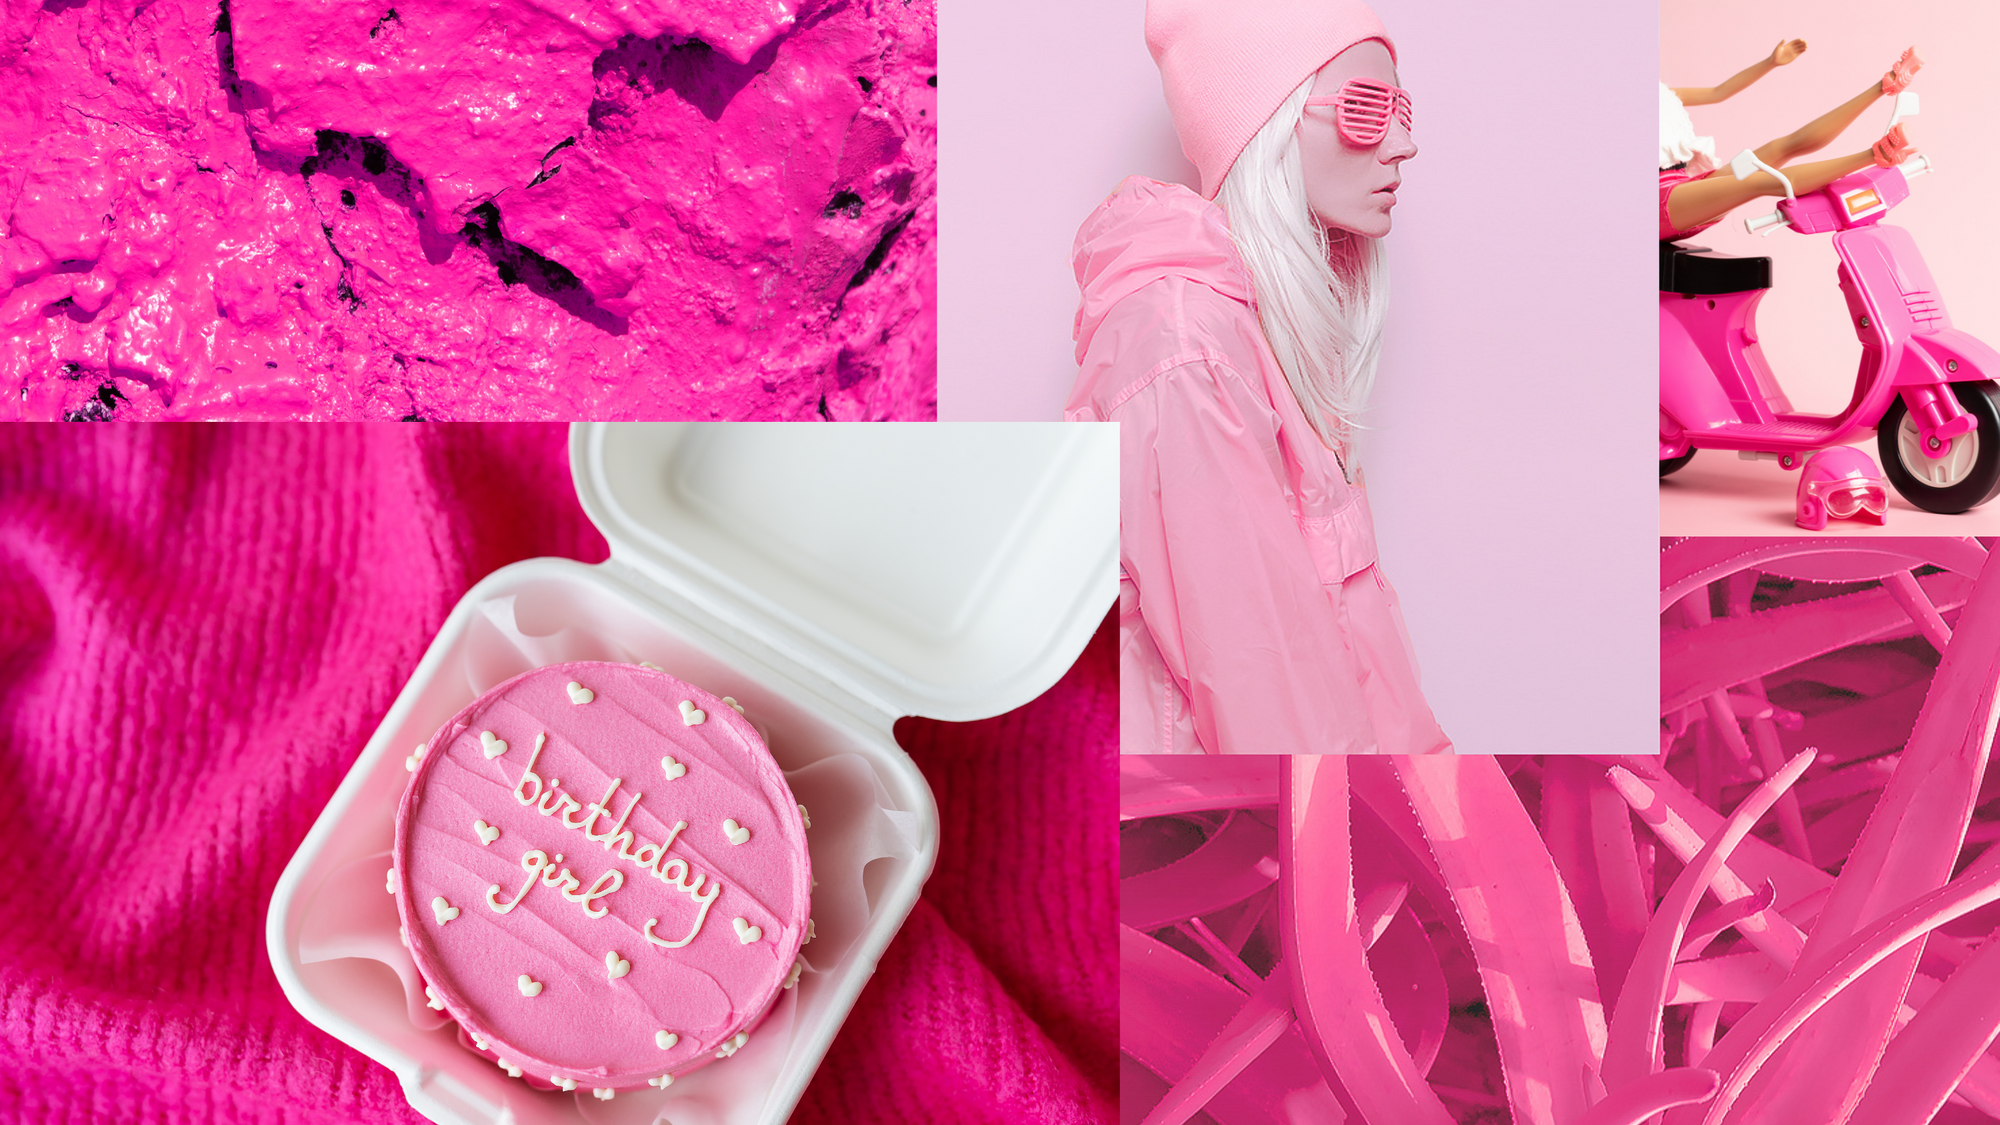 Is Hot Pink here to stay?